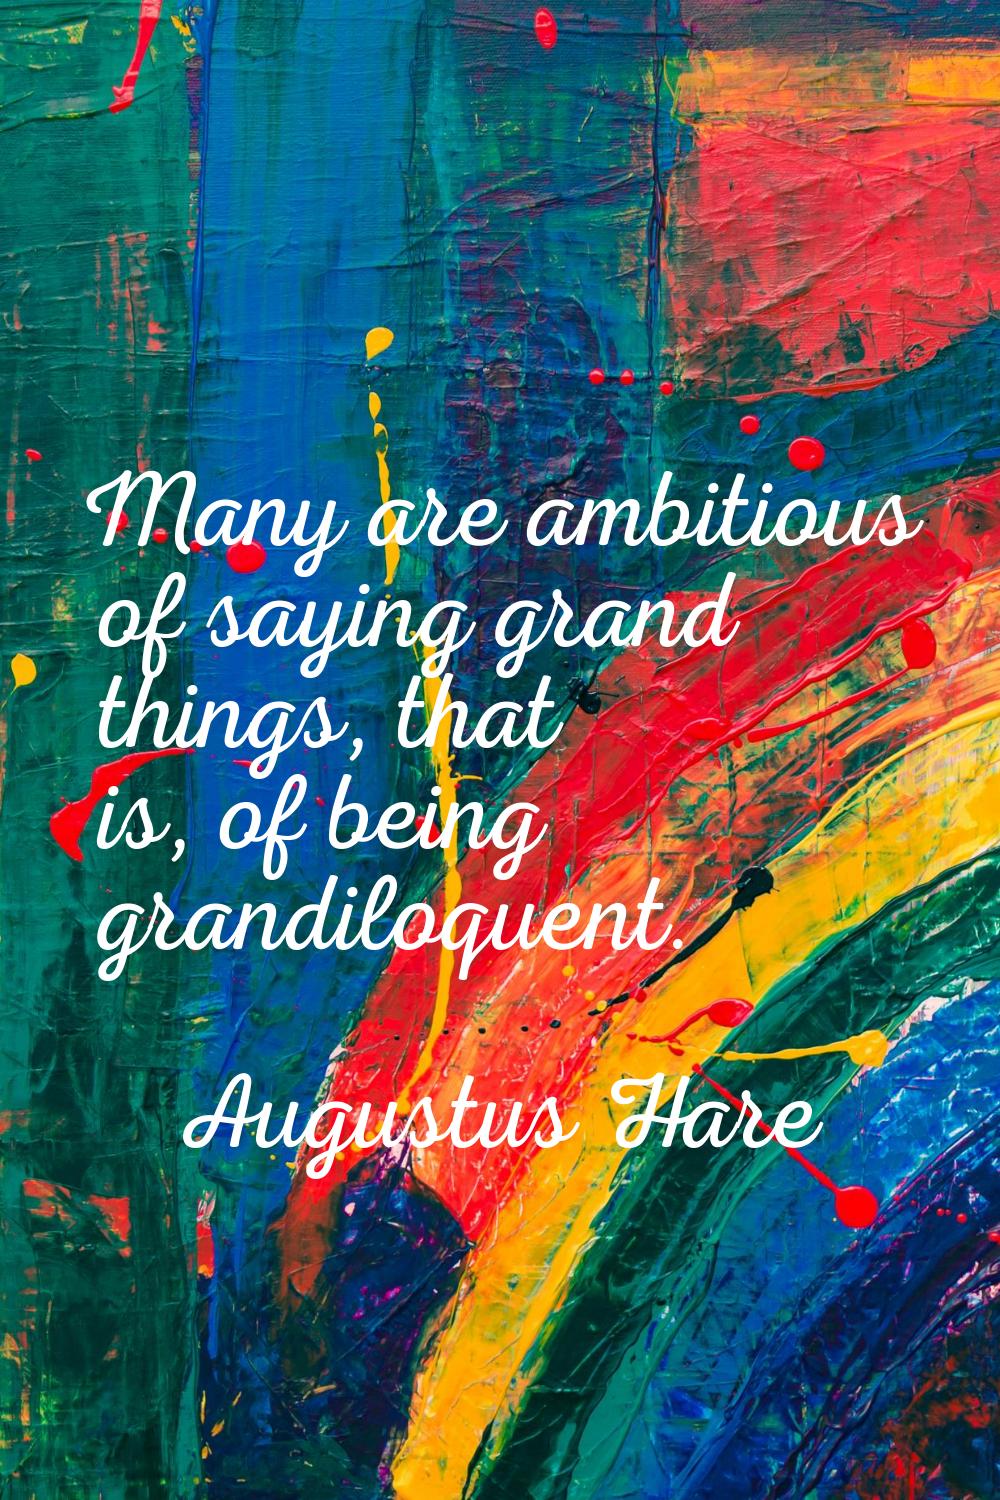 Many are ambitious of saying grand things, that is, of being grandiloquent.